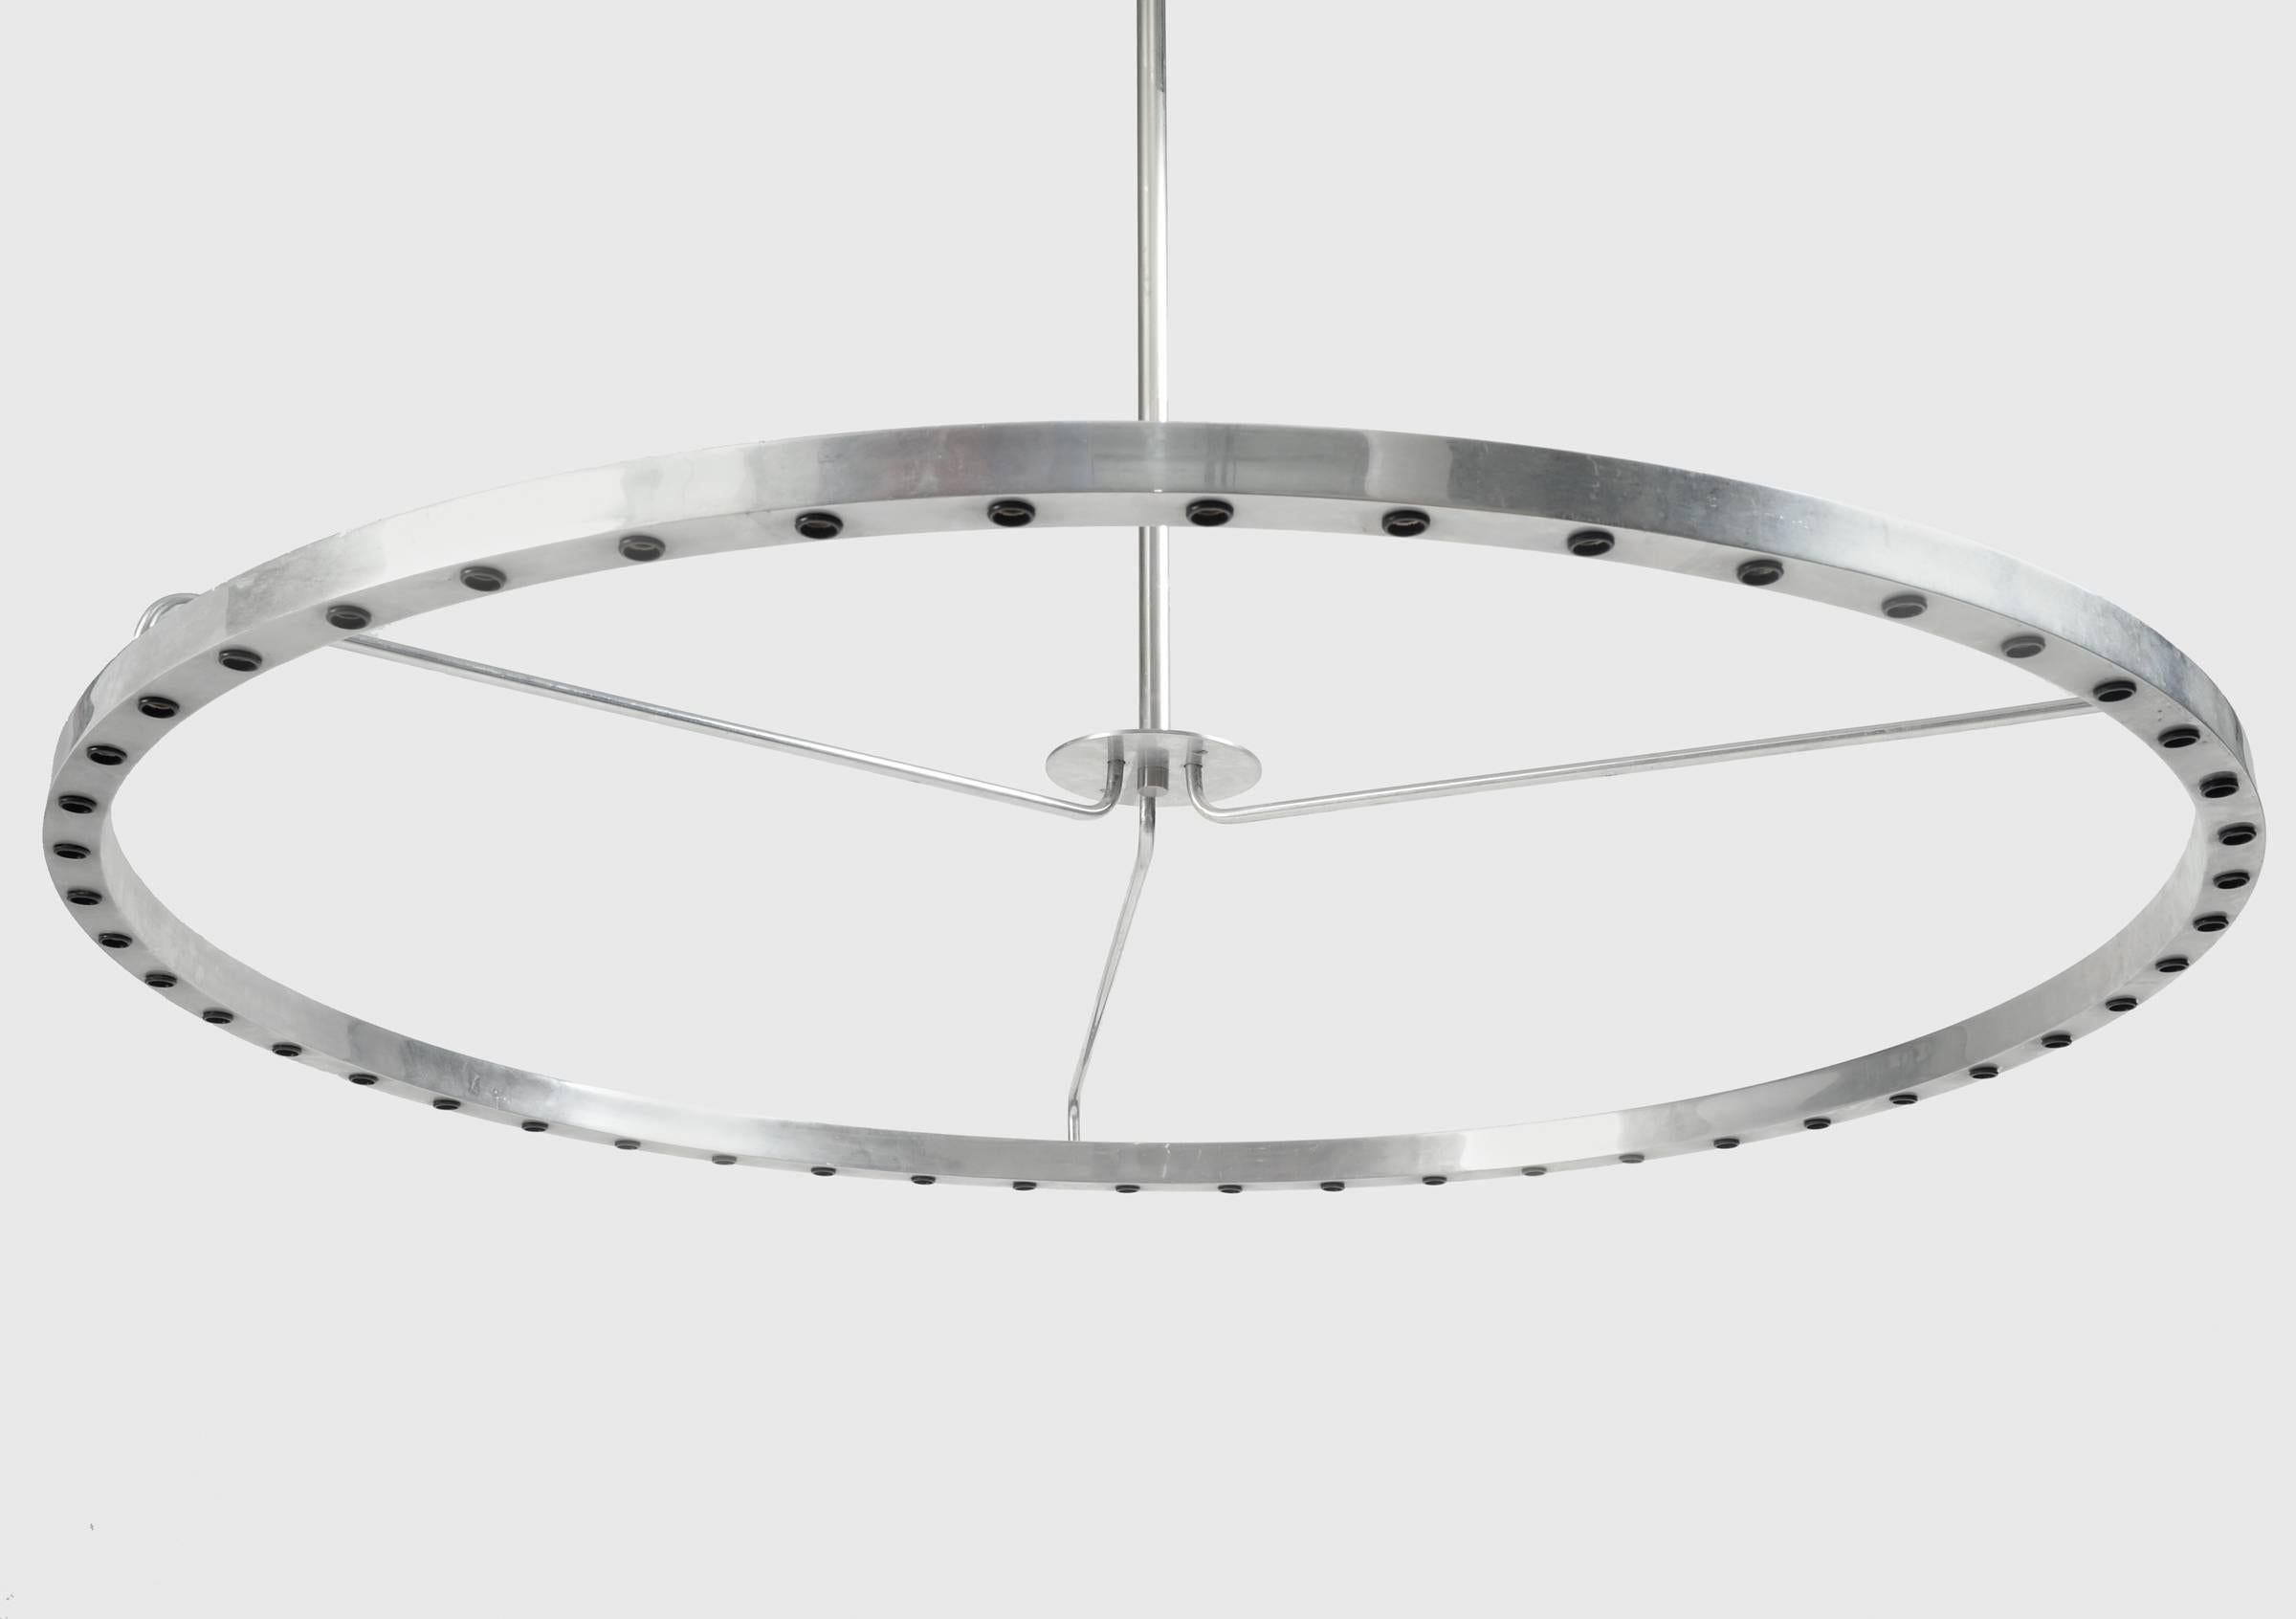 If you want a Minimalist design, this is it for a chandelier. Constructed of aluminium with 48 sockets, yes 48! It would look outstanding with opaque round bulbs or silver reflectors. Absolutely put this chandelier on a dimmer! It is 49 inches wide.